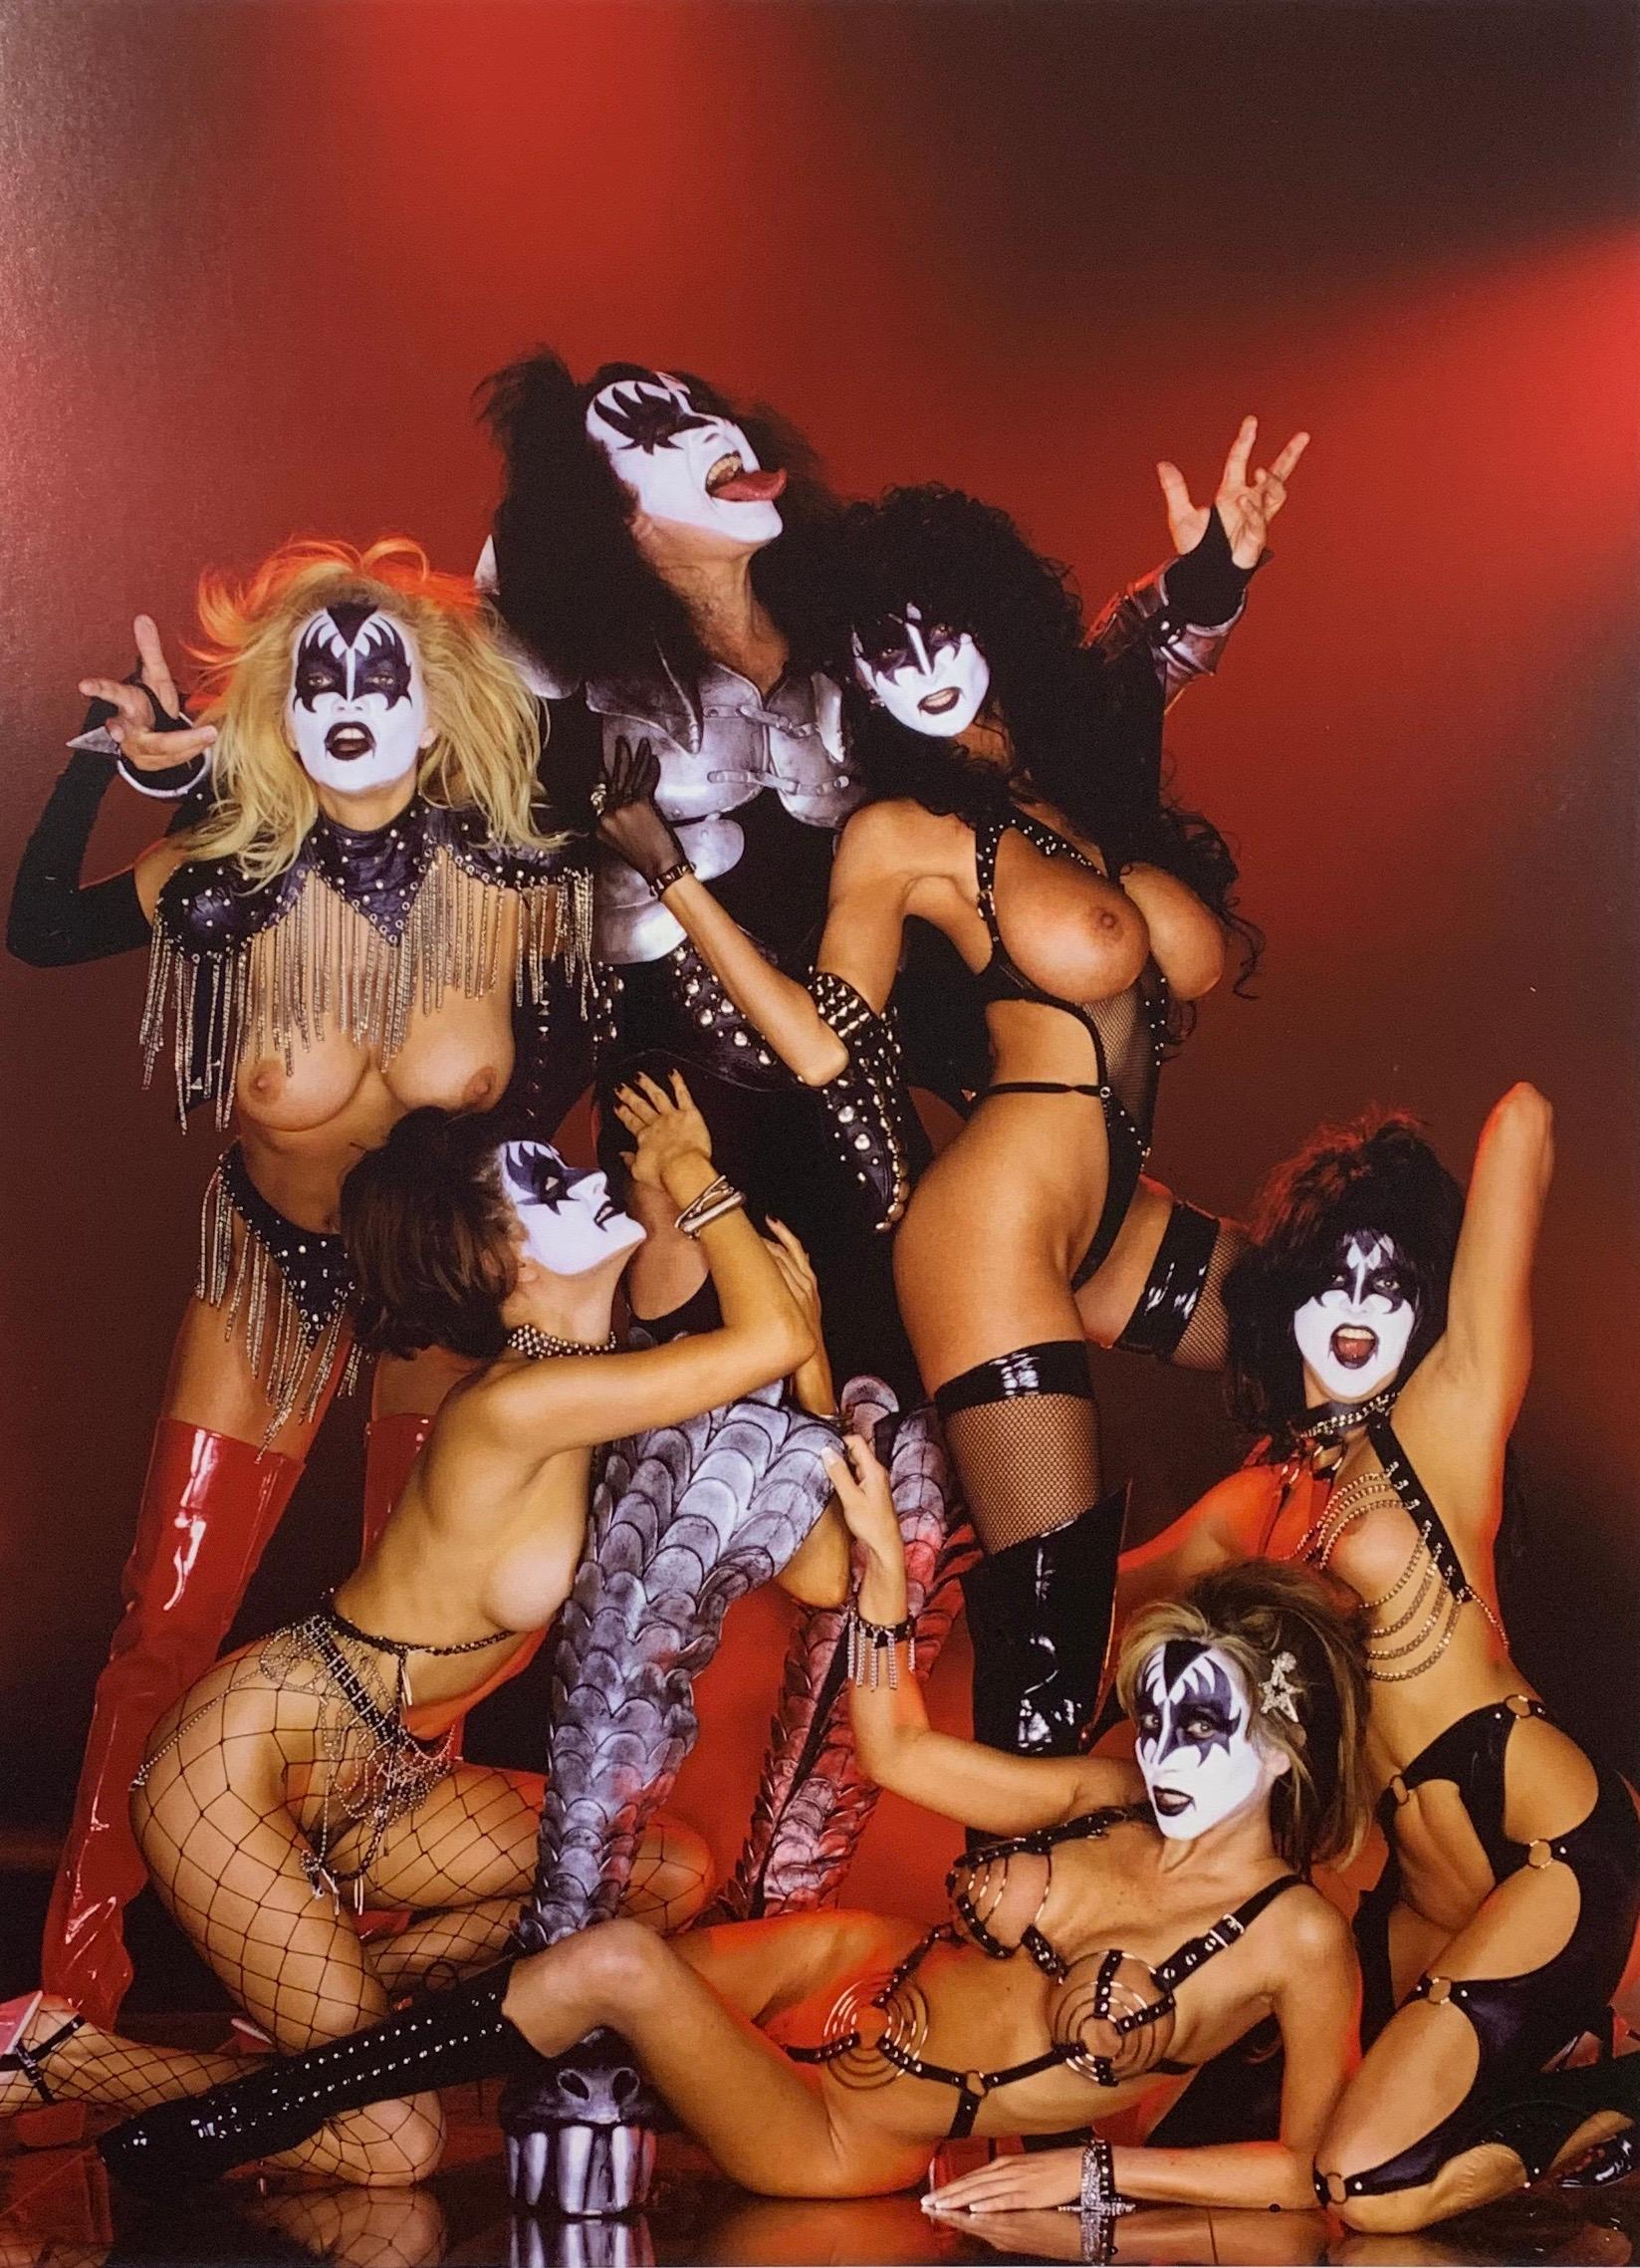 Arny Freytag Nude Photograph - "Girls of KISS" by Any Freytag for Playboy Legacy Edition 33 of 75